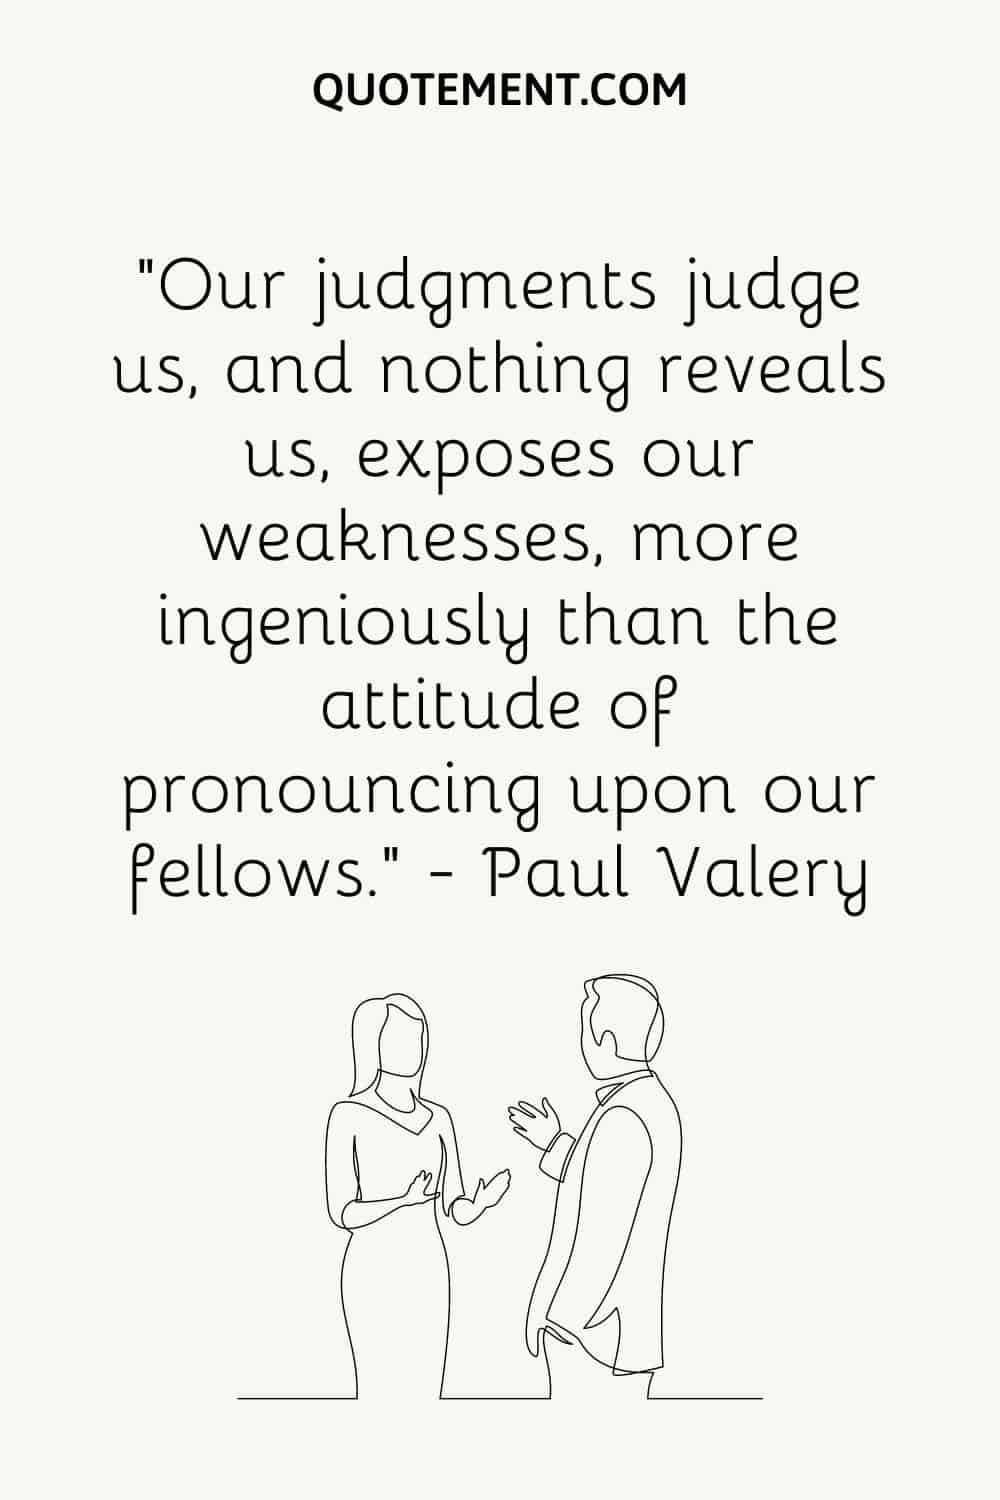 “Our judgments judge us, and nothing reveals us, exposes our weaknesses, more ingeniously than the attitude of pronouncing upon our fellows.” — Paul Valery